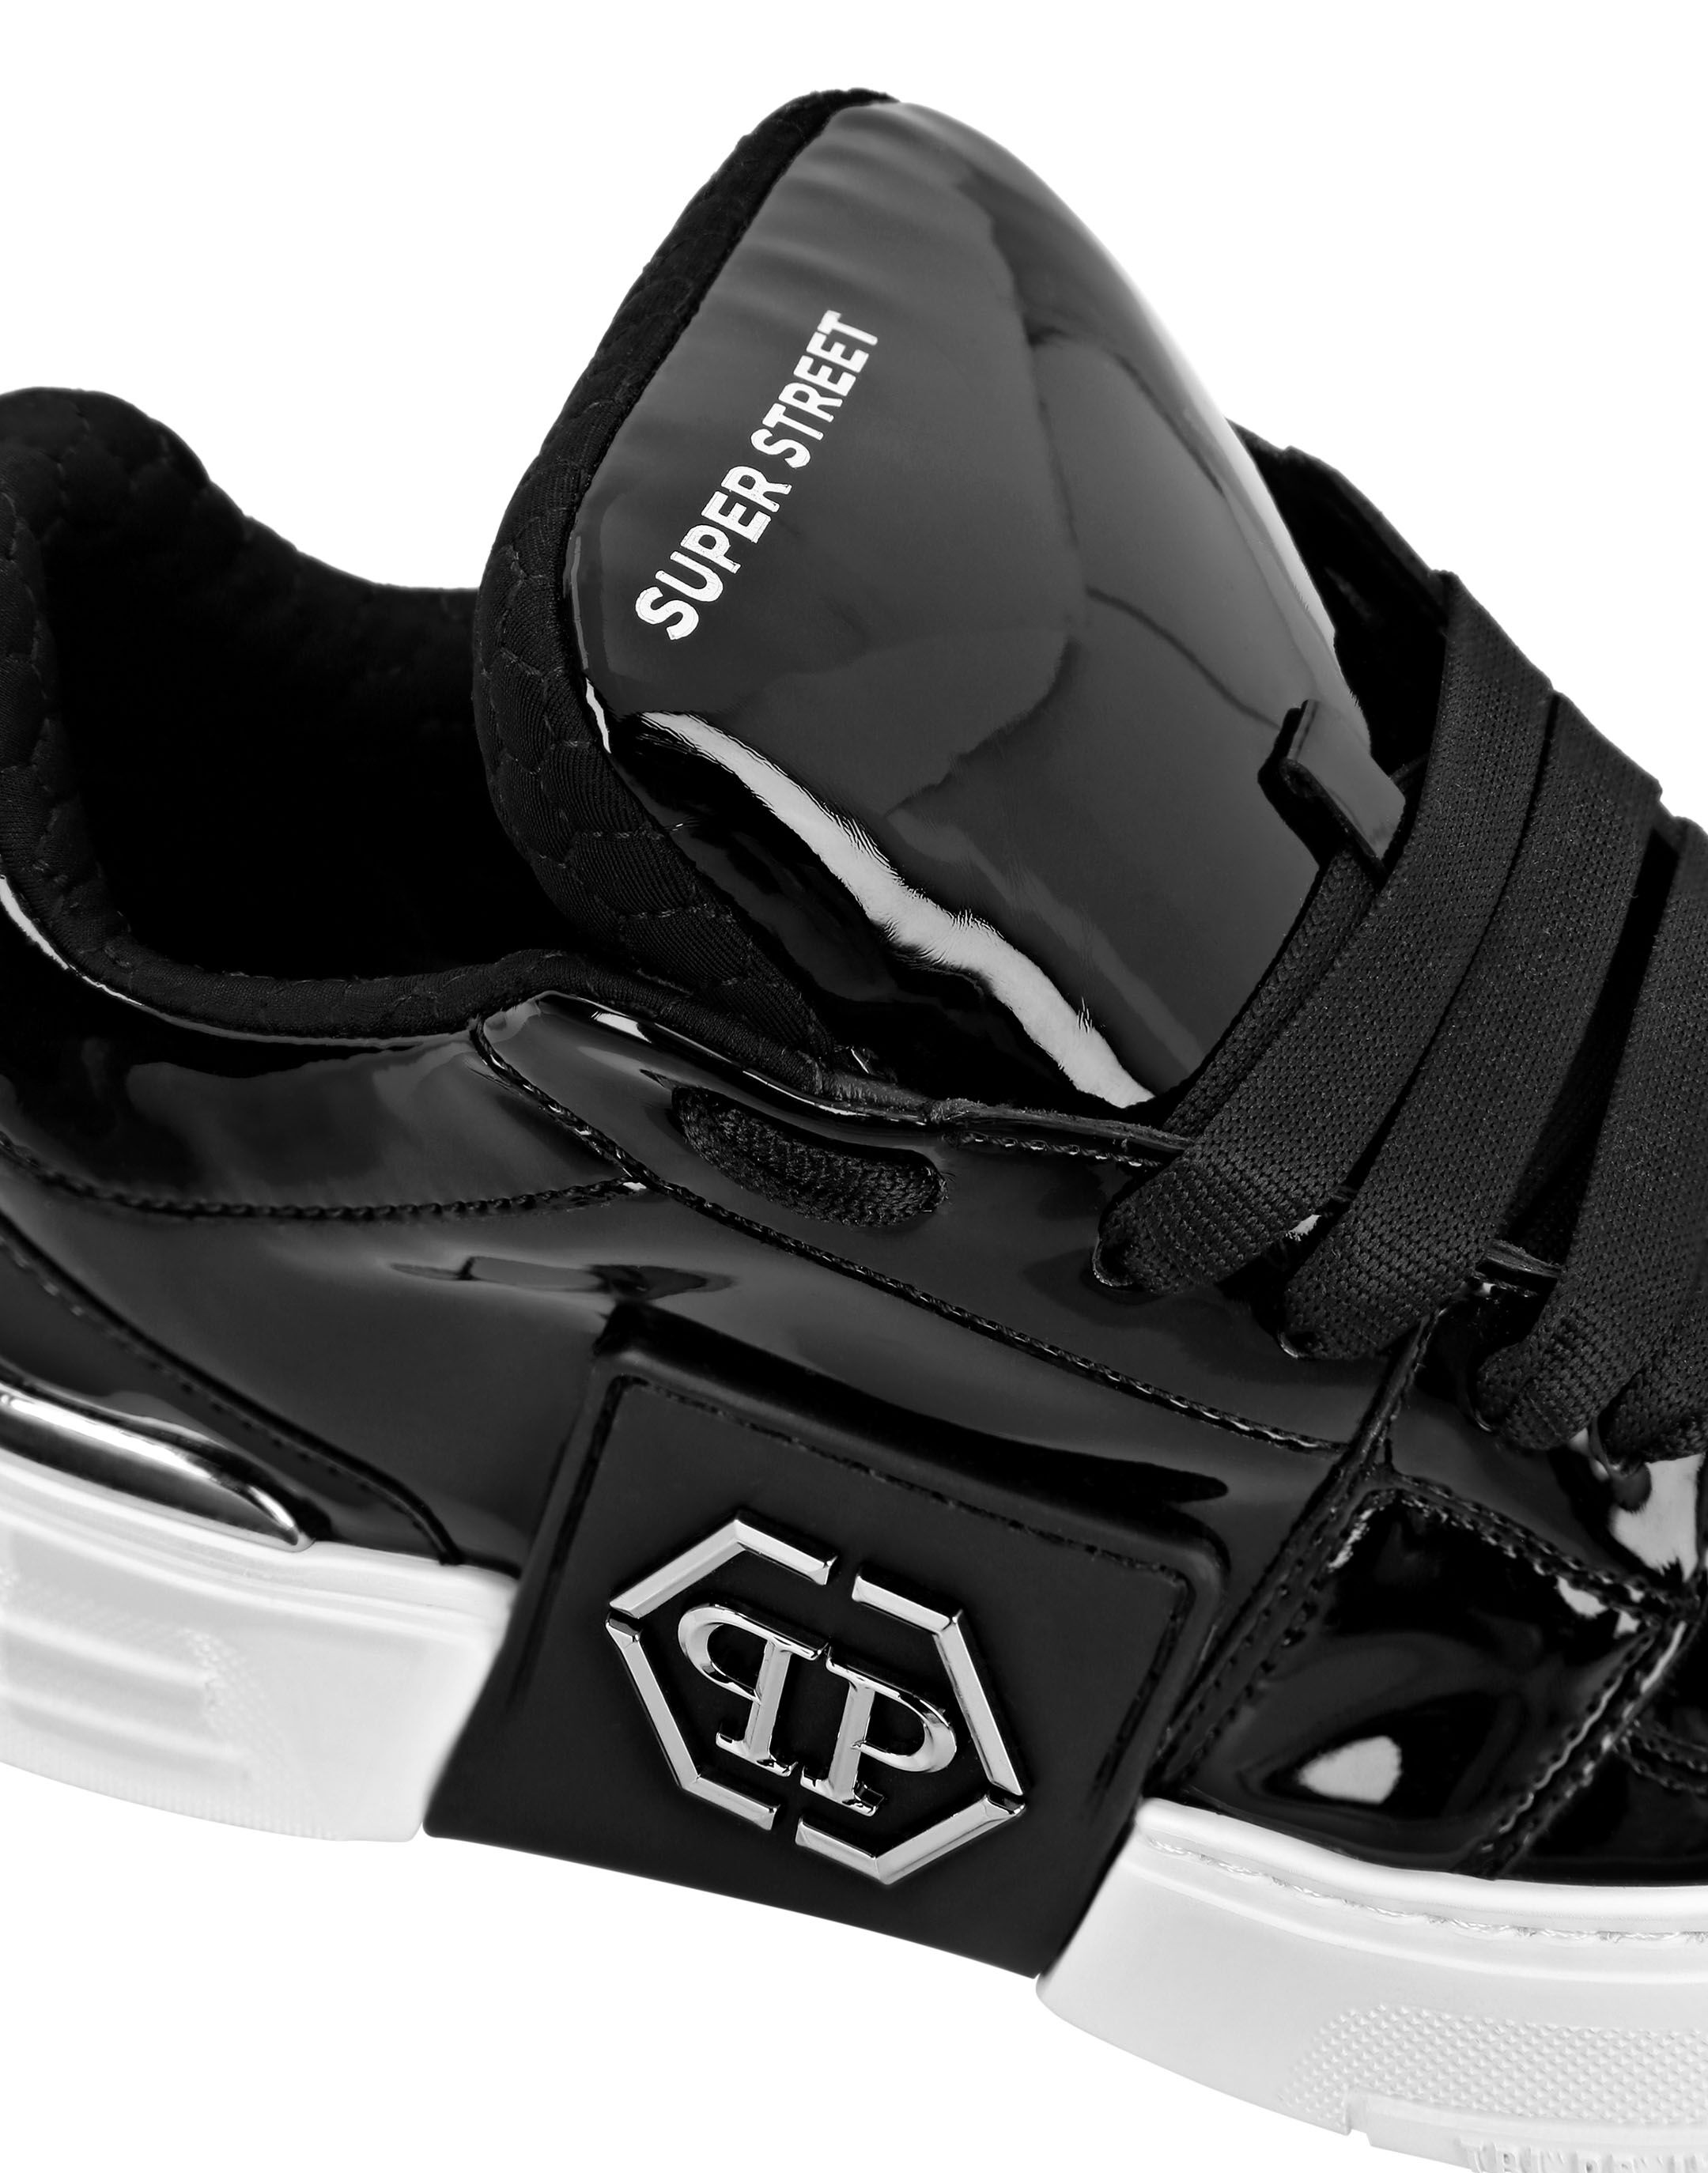 CAMPUS HOT-RIDE PLUS Running Shoes For Men - Buy CAMPUS HOT-RIDE PLUS  Running Shoes For Men Online at Best Price - Shop Online for Footwears in  India | Flipkart.com